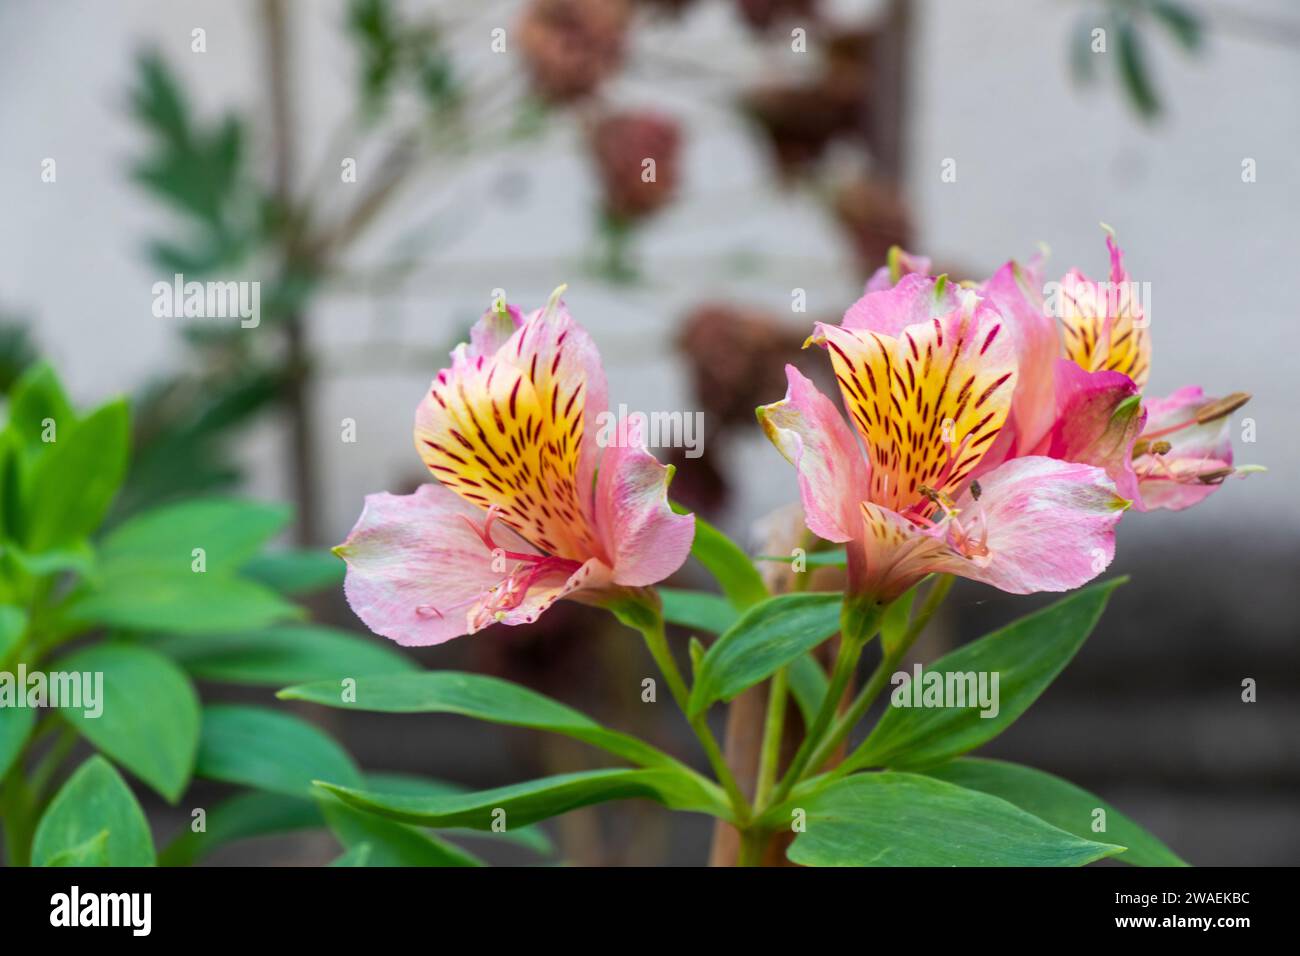 A closeup of pink parrot flowers in a garden Stock Photo